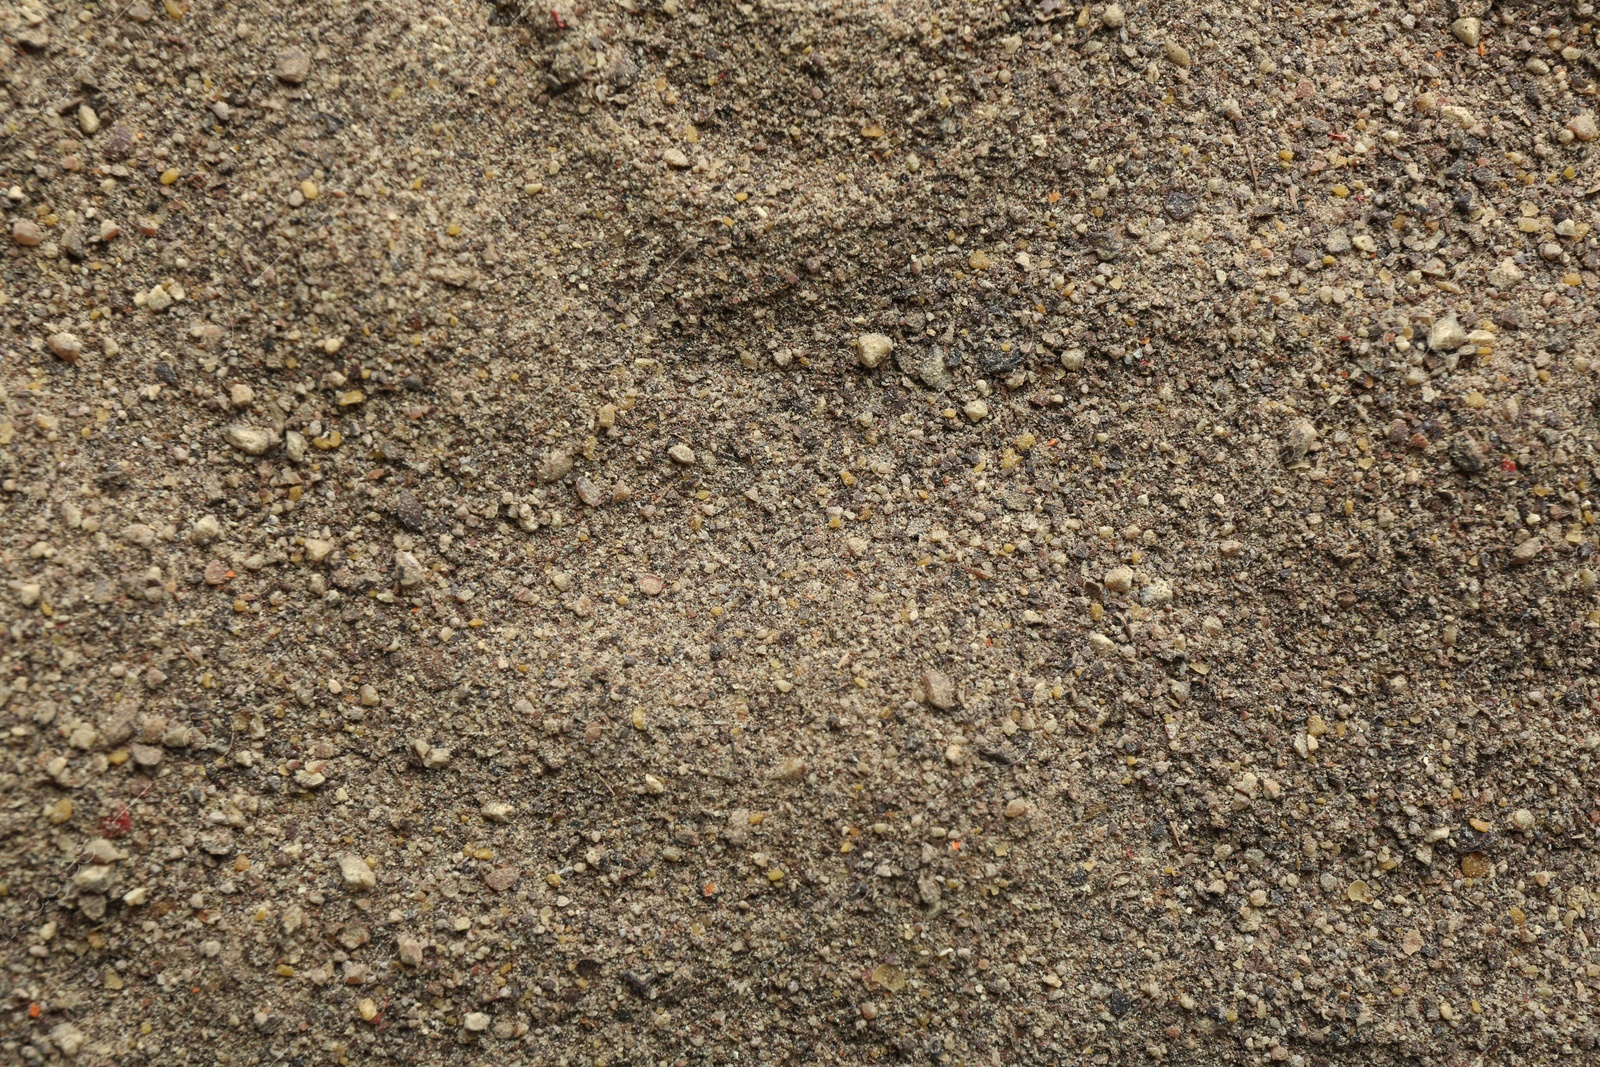 Photo of Ground black pepper as background, top view